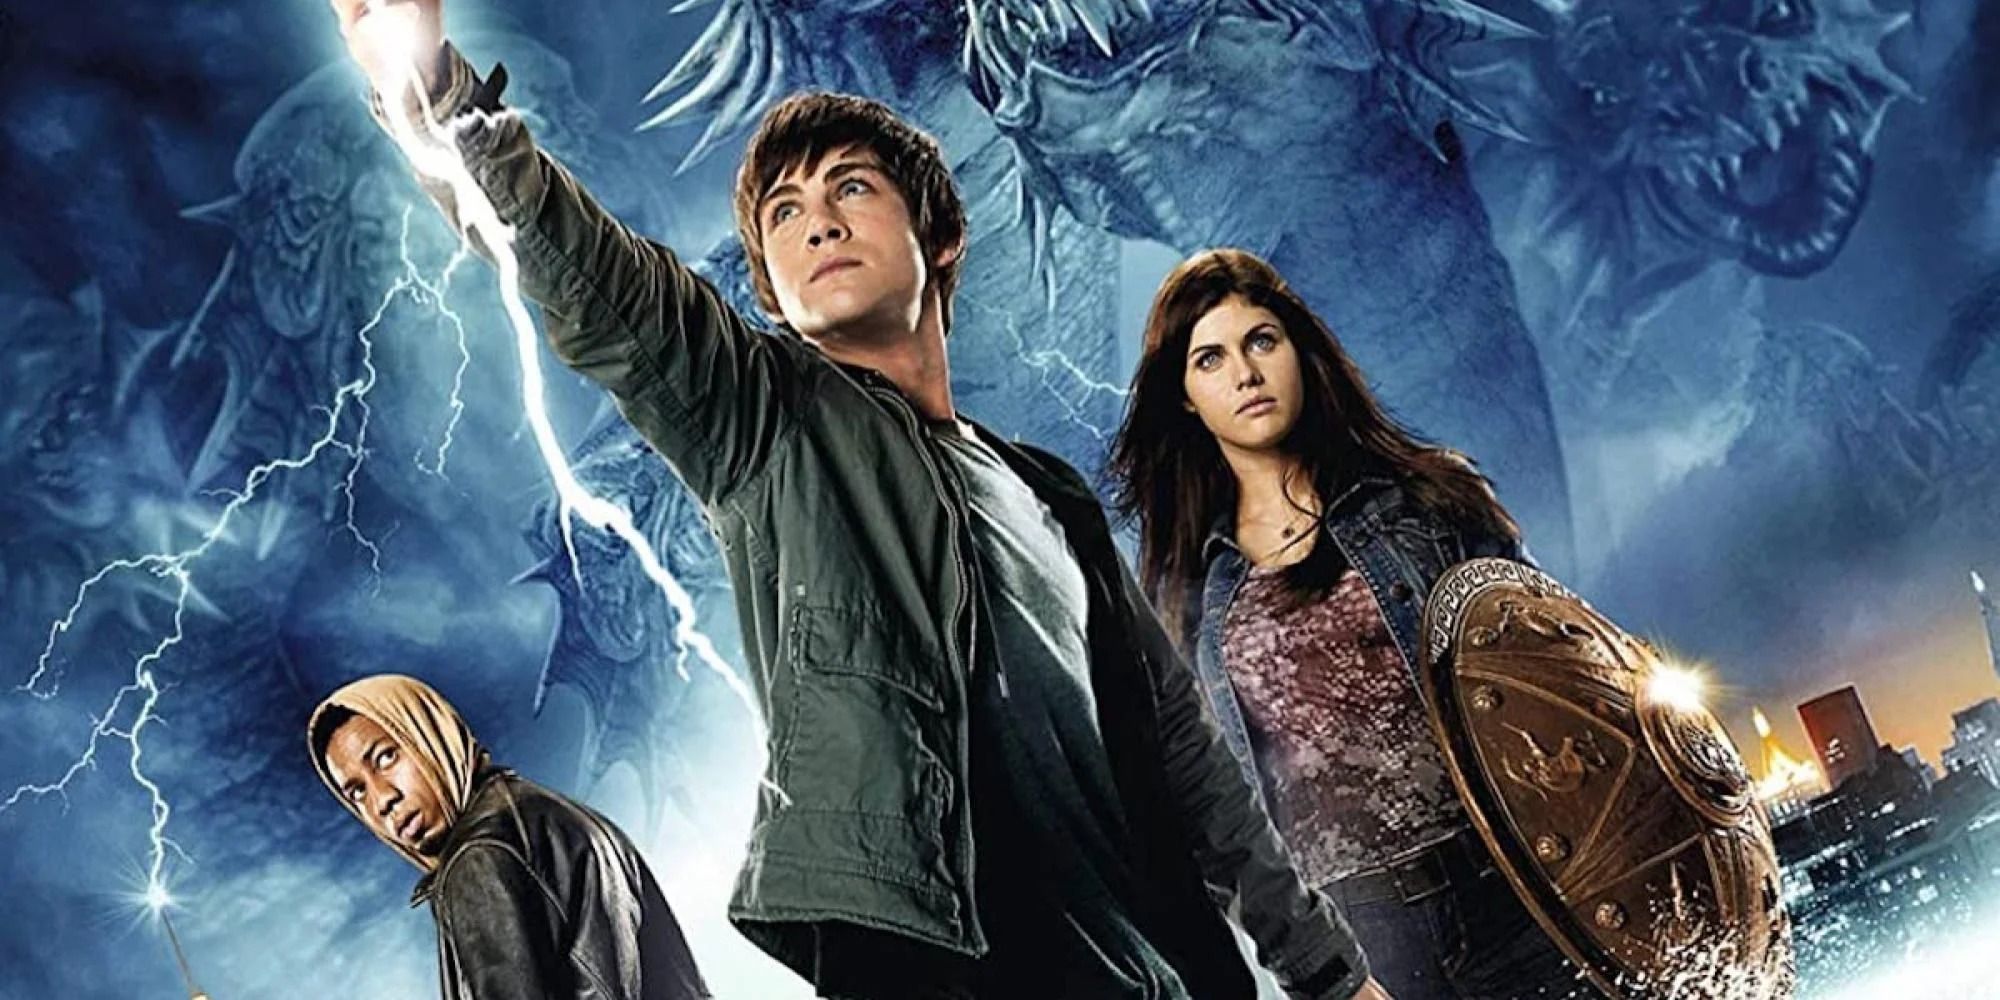 Promotional image for 'Percy Jackson and the Lightning Thief' (2010)